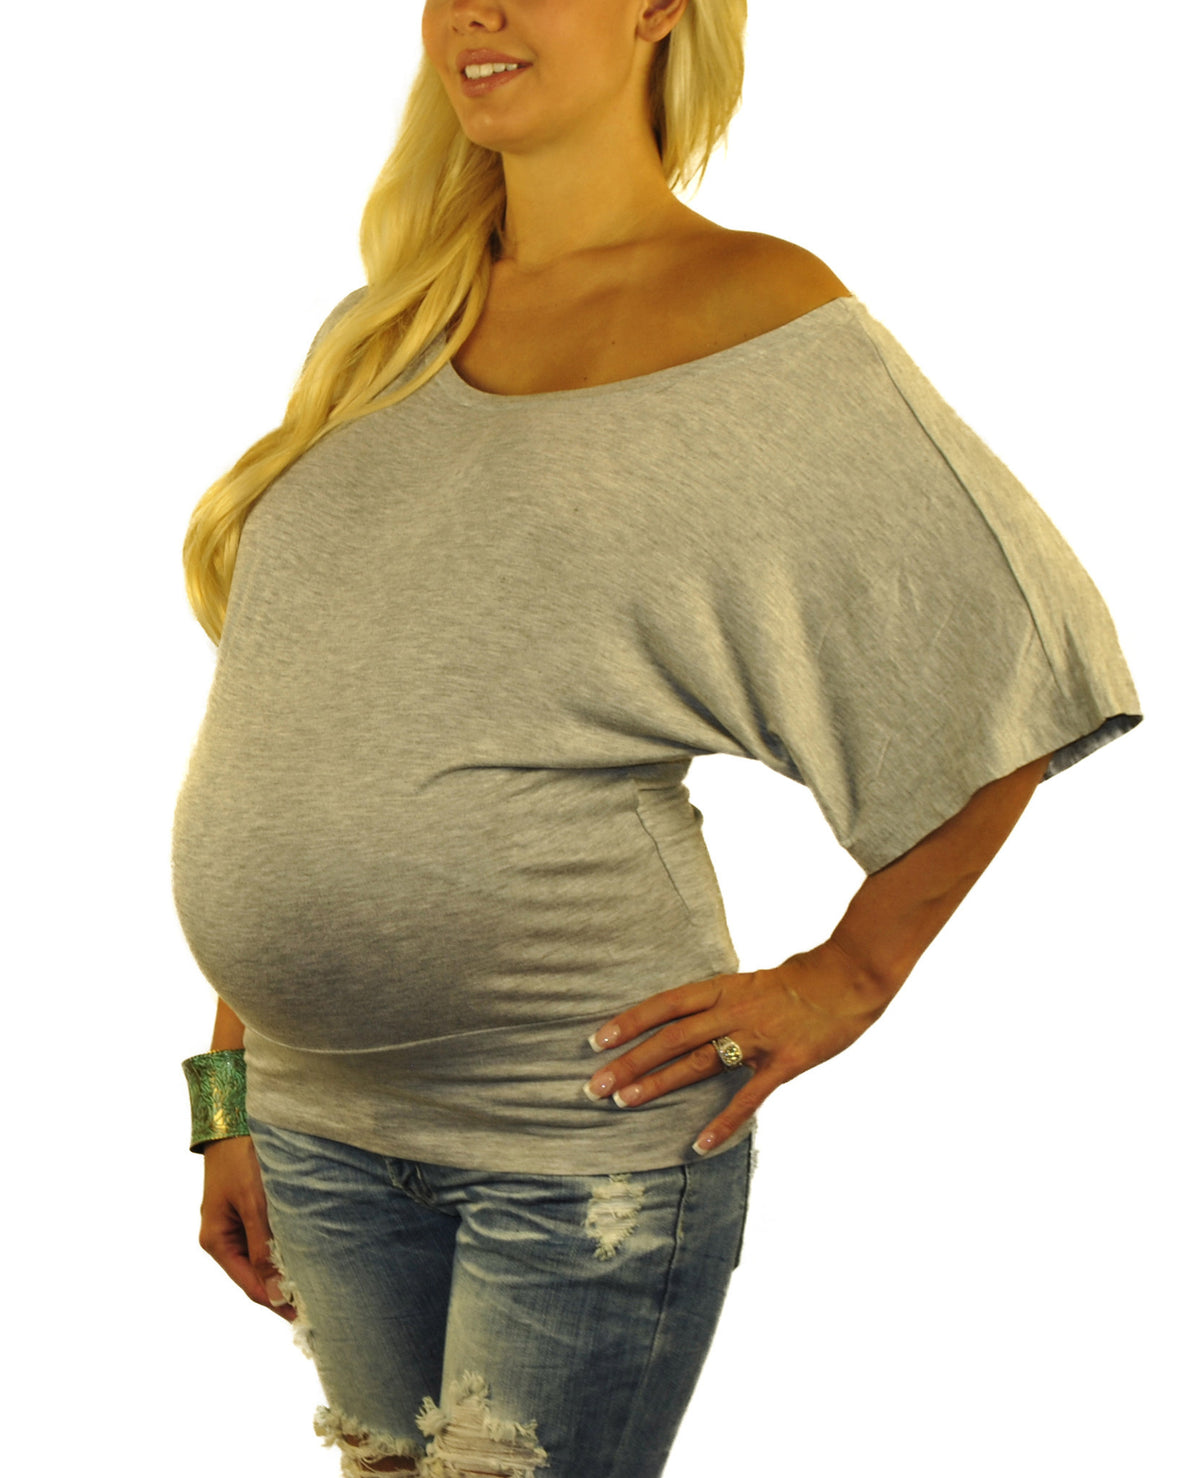 Plus Size Maternity Top - Mommylicious